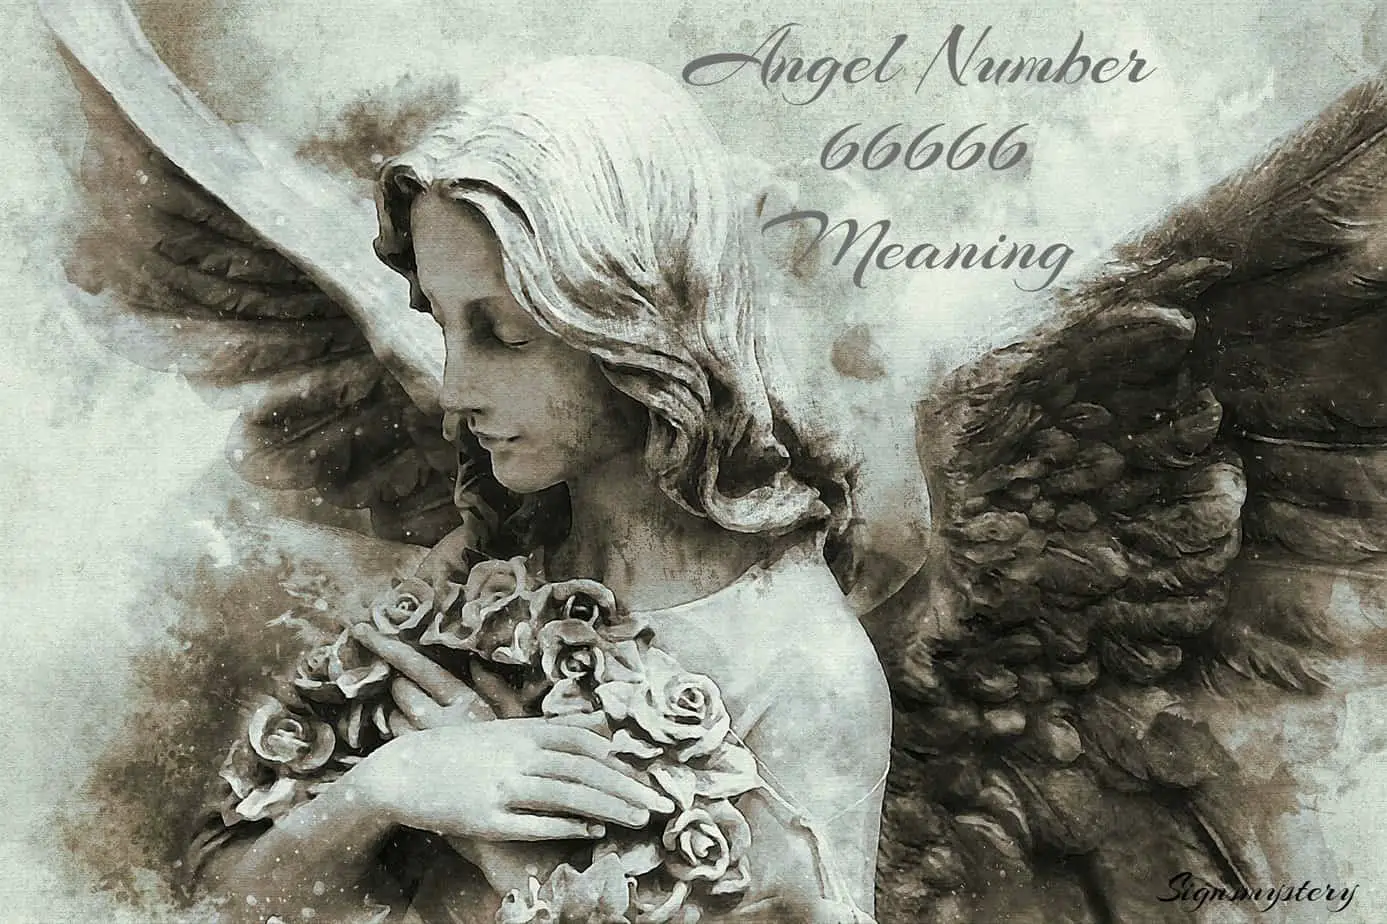 66666 Angel Number: Symbolism and Spiritual Meaning